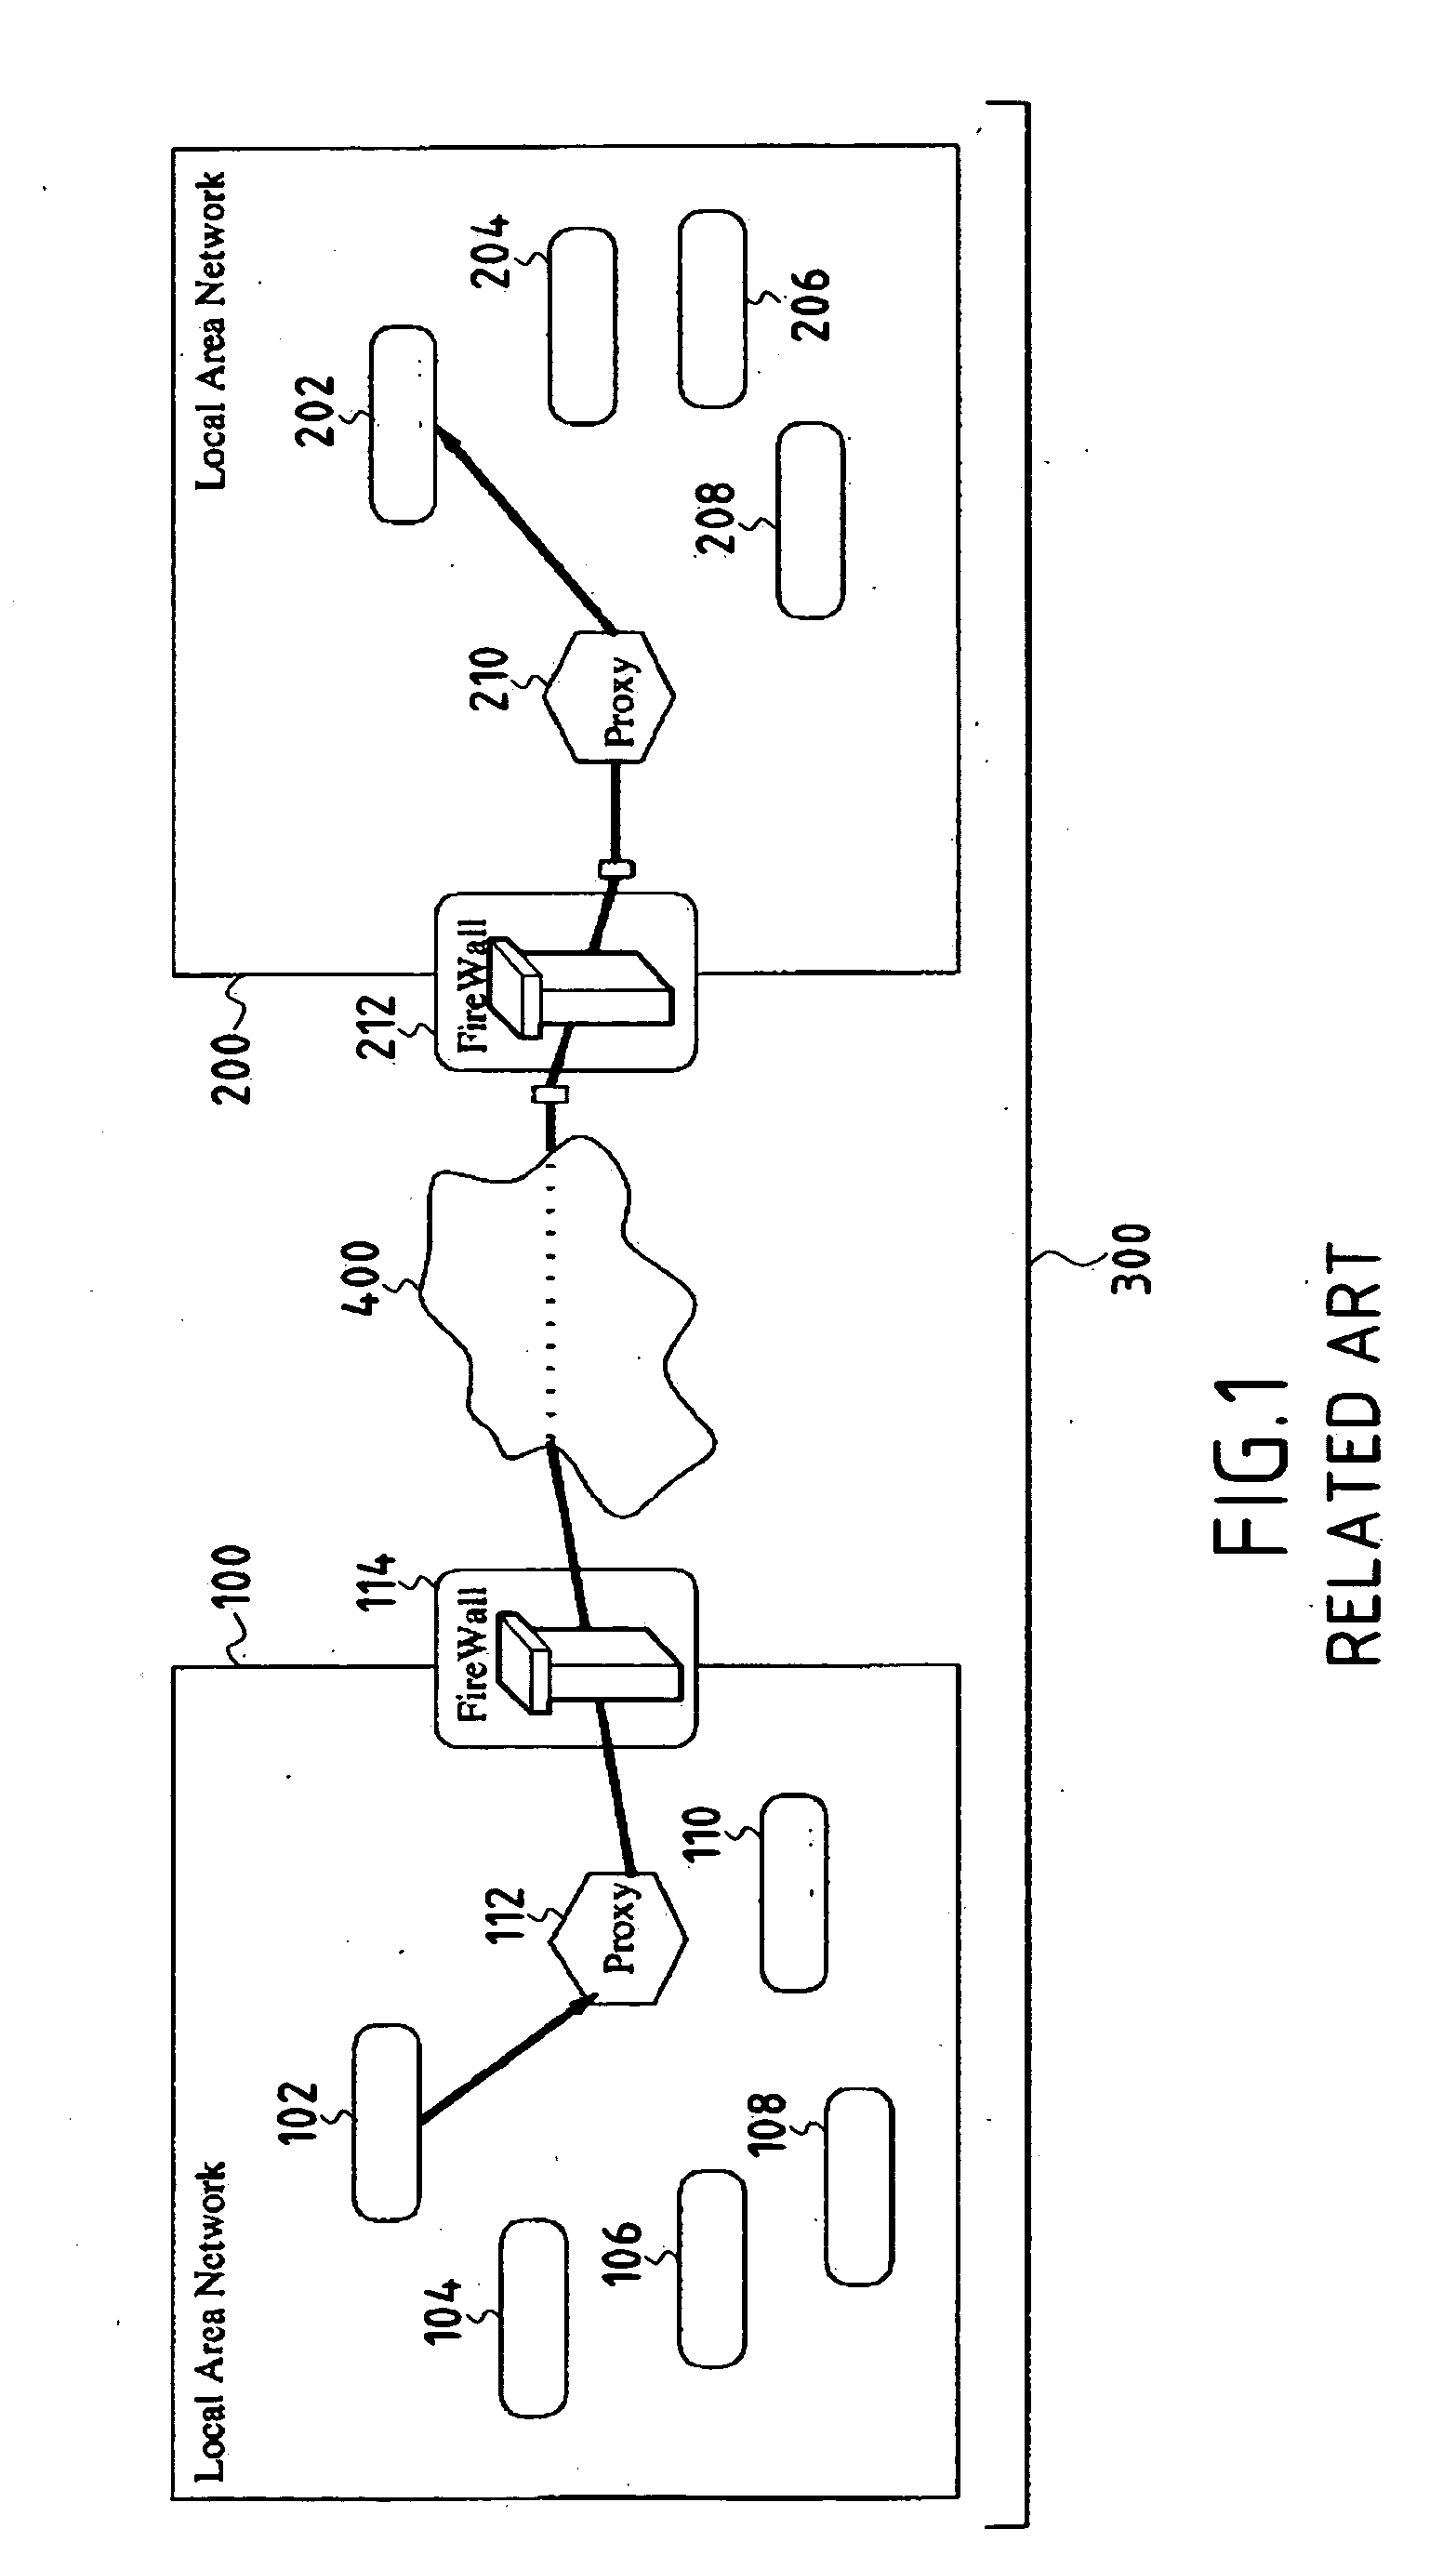 Method and system for packet data communication between networks